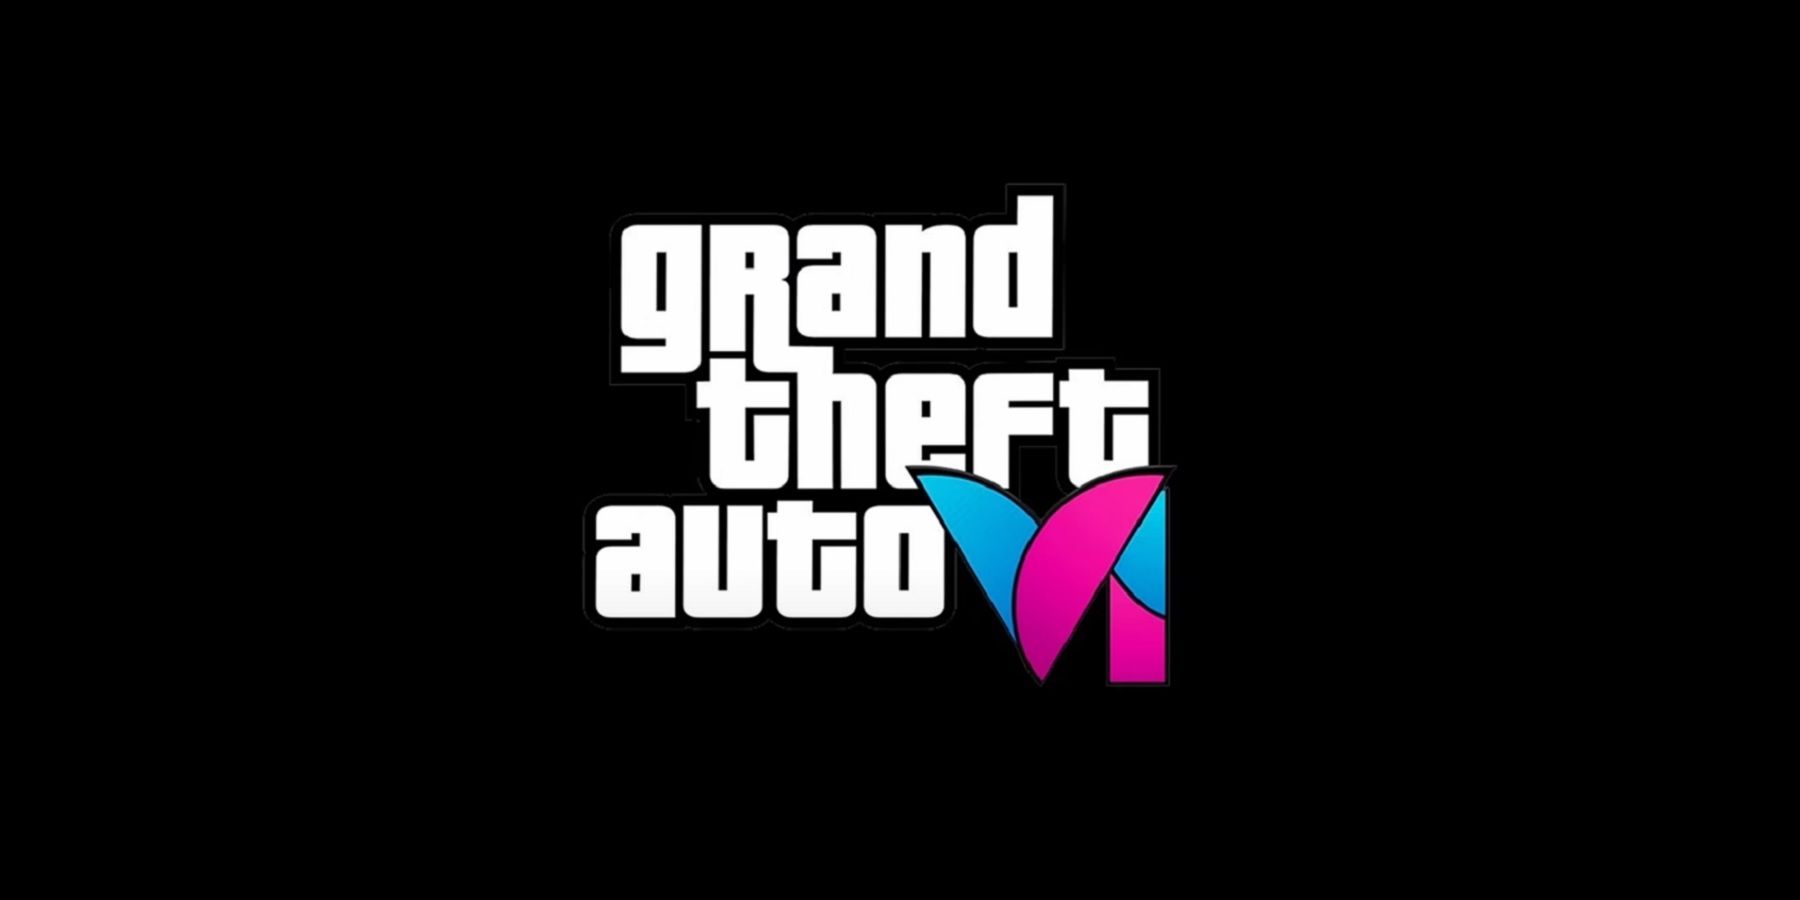 What is the gta 5 theme song (120) фото